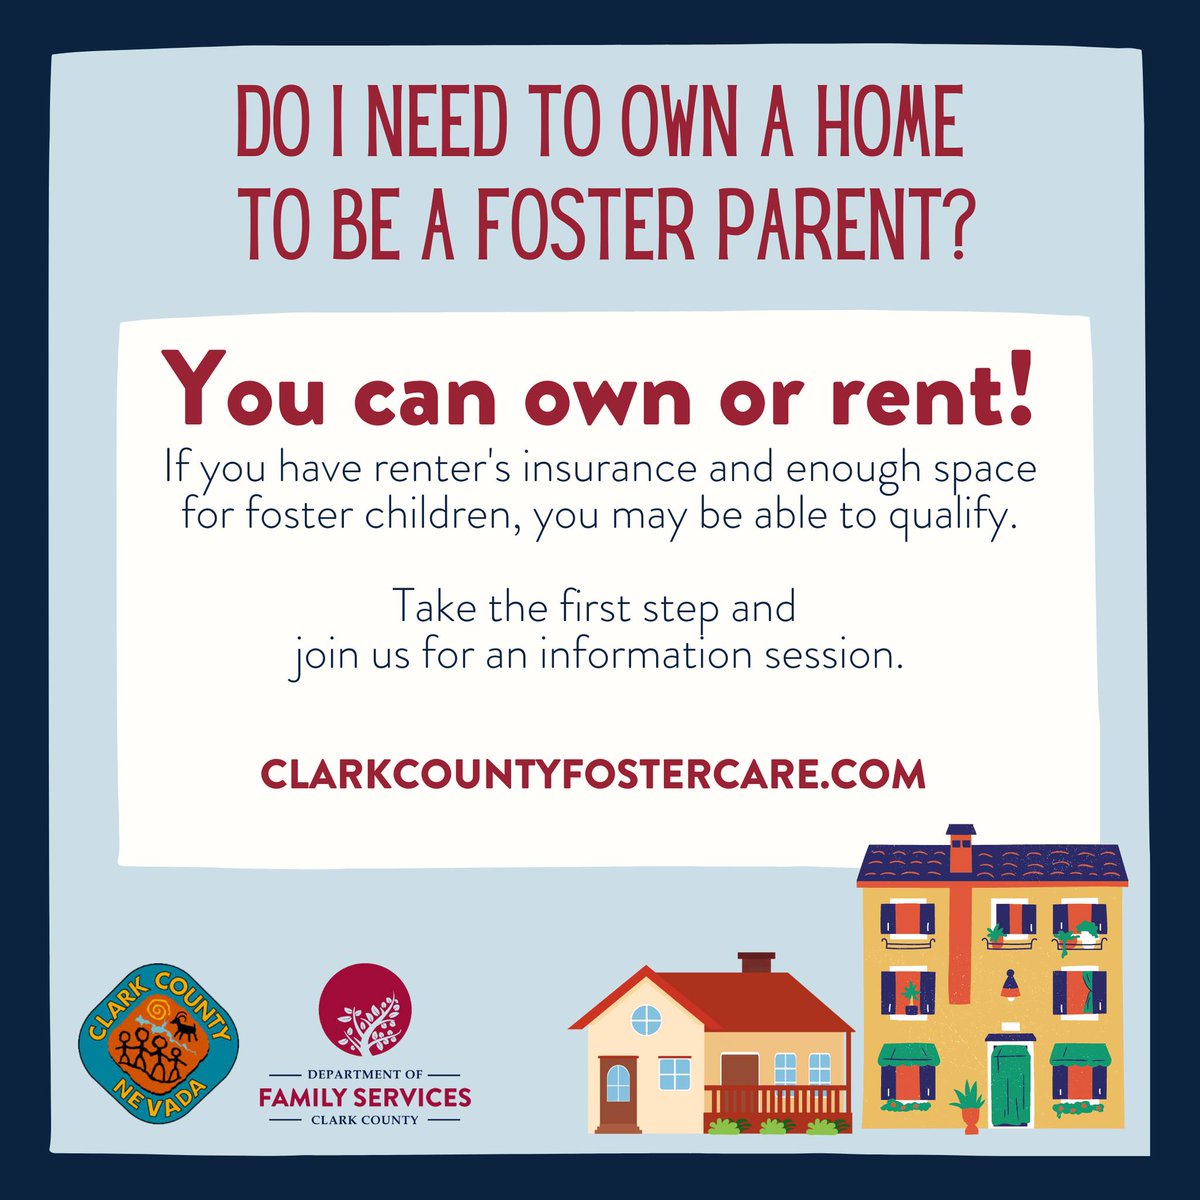 Our #ClarkCounty Family Services Dept. often hears that potential #fosterparents want to foster once they buy a home. 

But if you are in a stable rental & can provide renter's insurance, what is stopping you?

RENTERS CAN FOSTER TOO! 

Learn more at clarkcountyfostercare.com